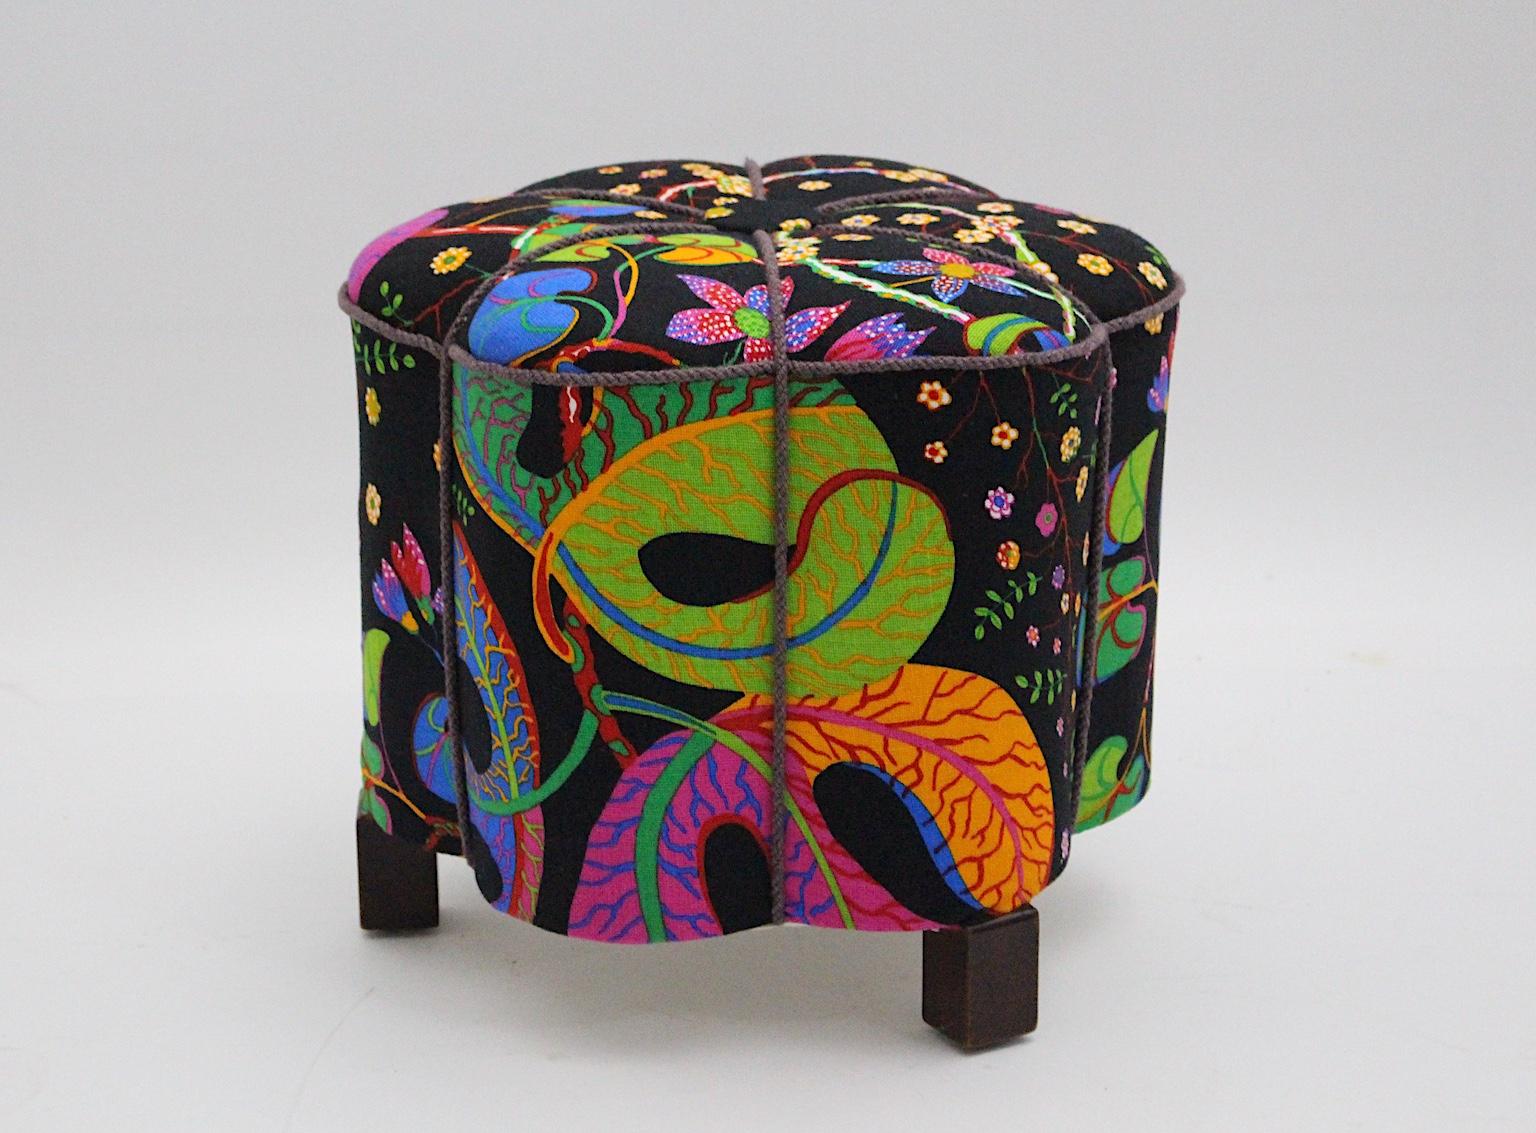 This amazing curved Art Deco vintage stool or pouf consists of a spruce base, beechwood feet and a renewed upholstery.
The beautiful and multicolored textile fabric covering was designed by Josef Frank in the 1930s and
is manufactured by Svenskt